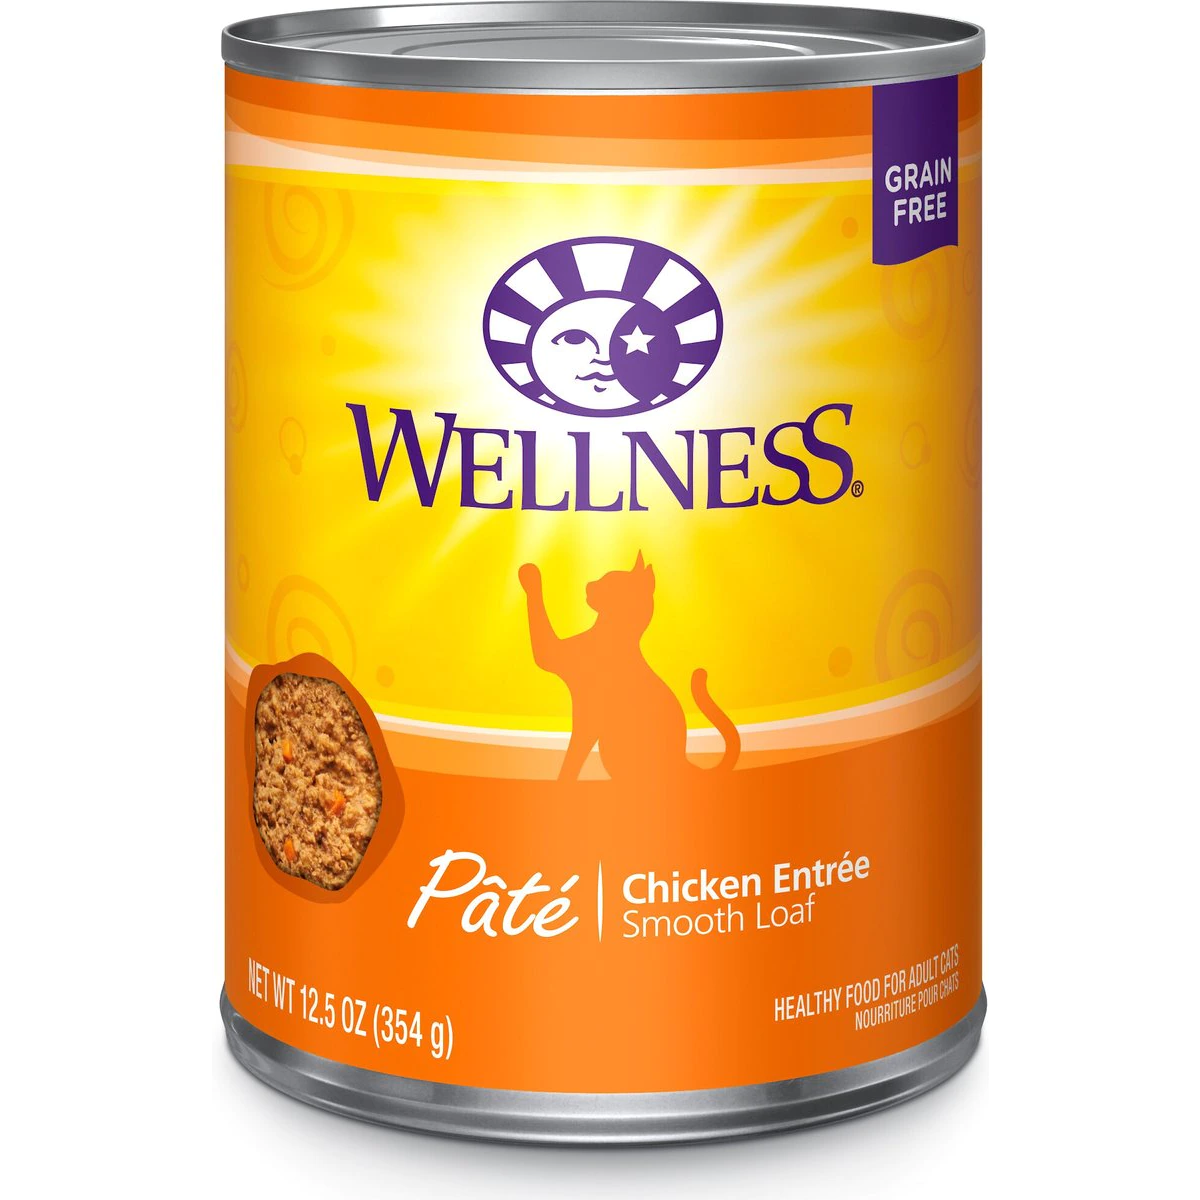 Wellness Complete Health Pate Chicken Entree Grain-Free Canned Cat Food 354g Canned Cat Food 354g | PetMax Canada